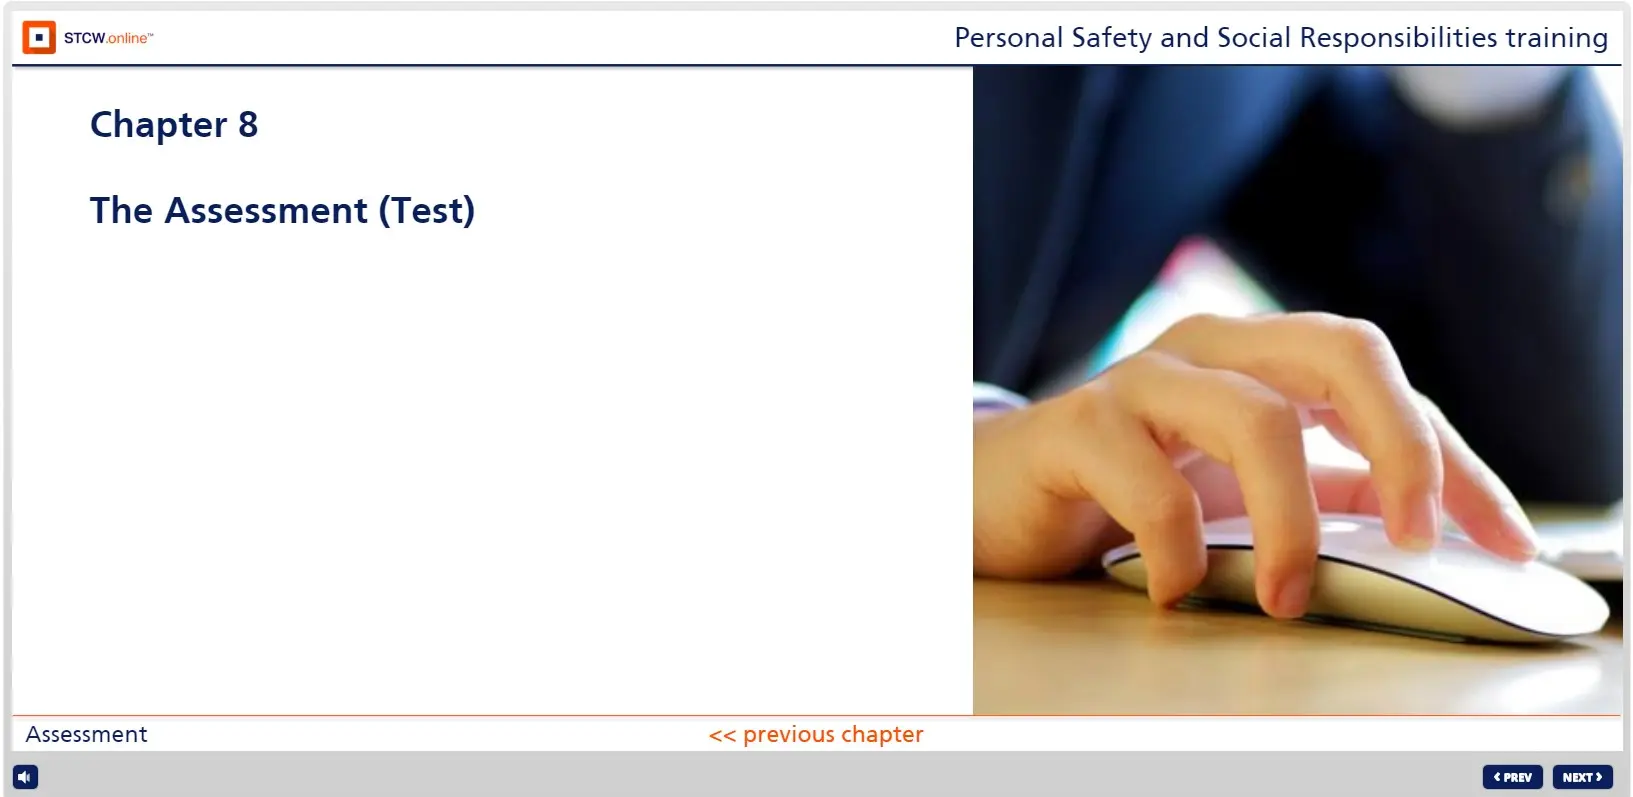 Personal Safety and Social Responsibilities 5 (1)